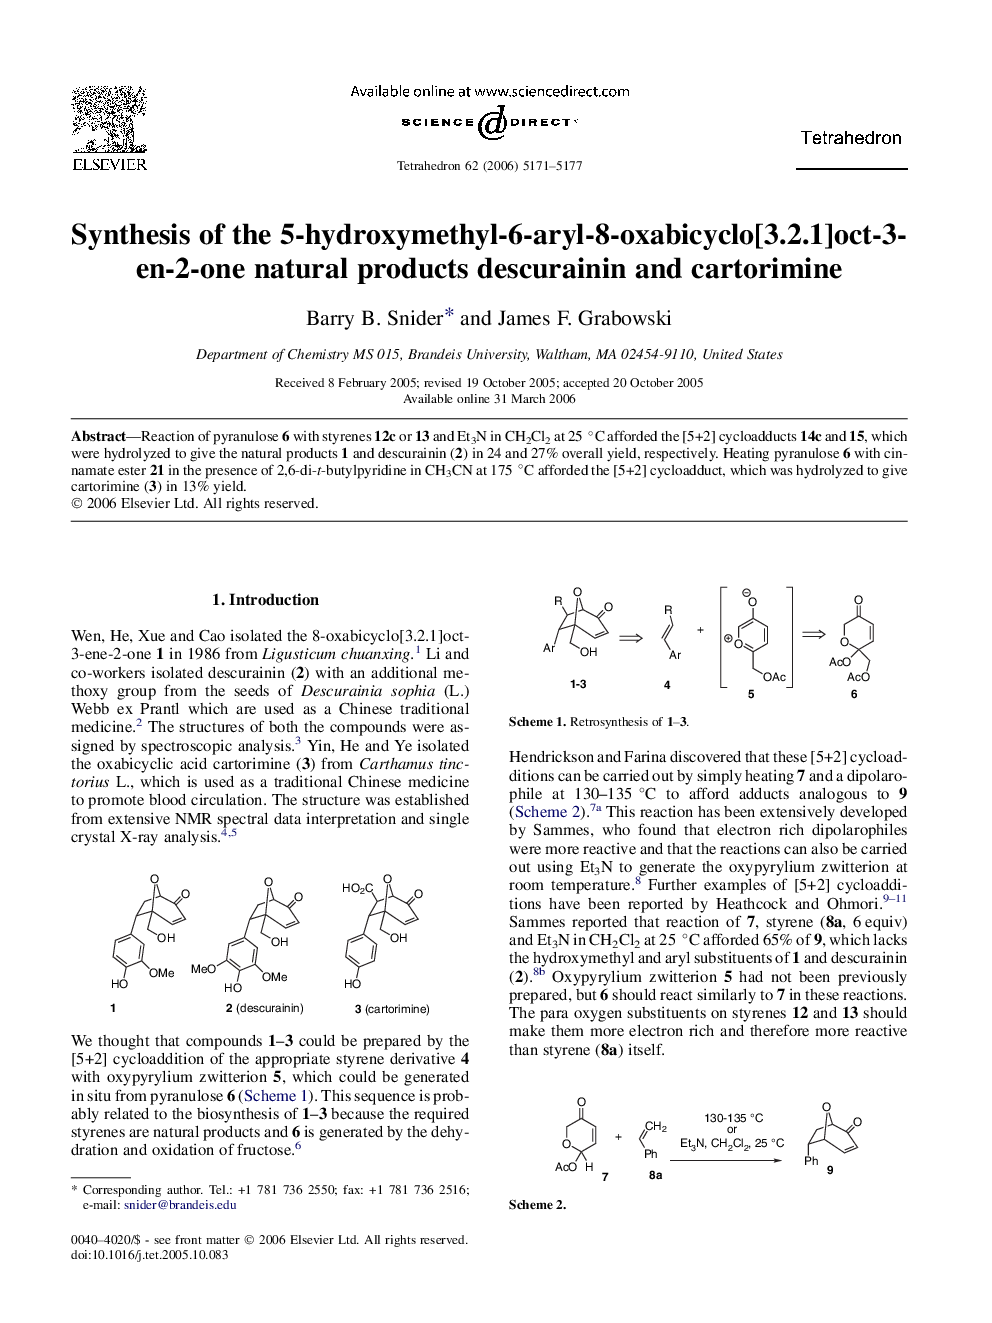 Synthesis of the 5-hydroxymethyl-6-aryl-8-oxabicyclo[3.2.1]oct-3-en-2-one natural products descurainin and cartorimine